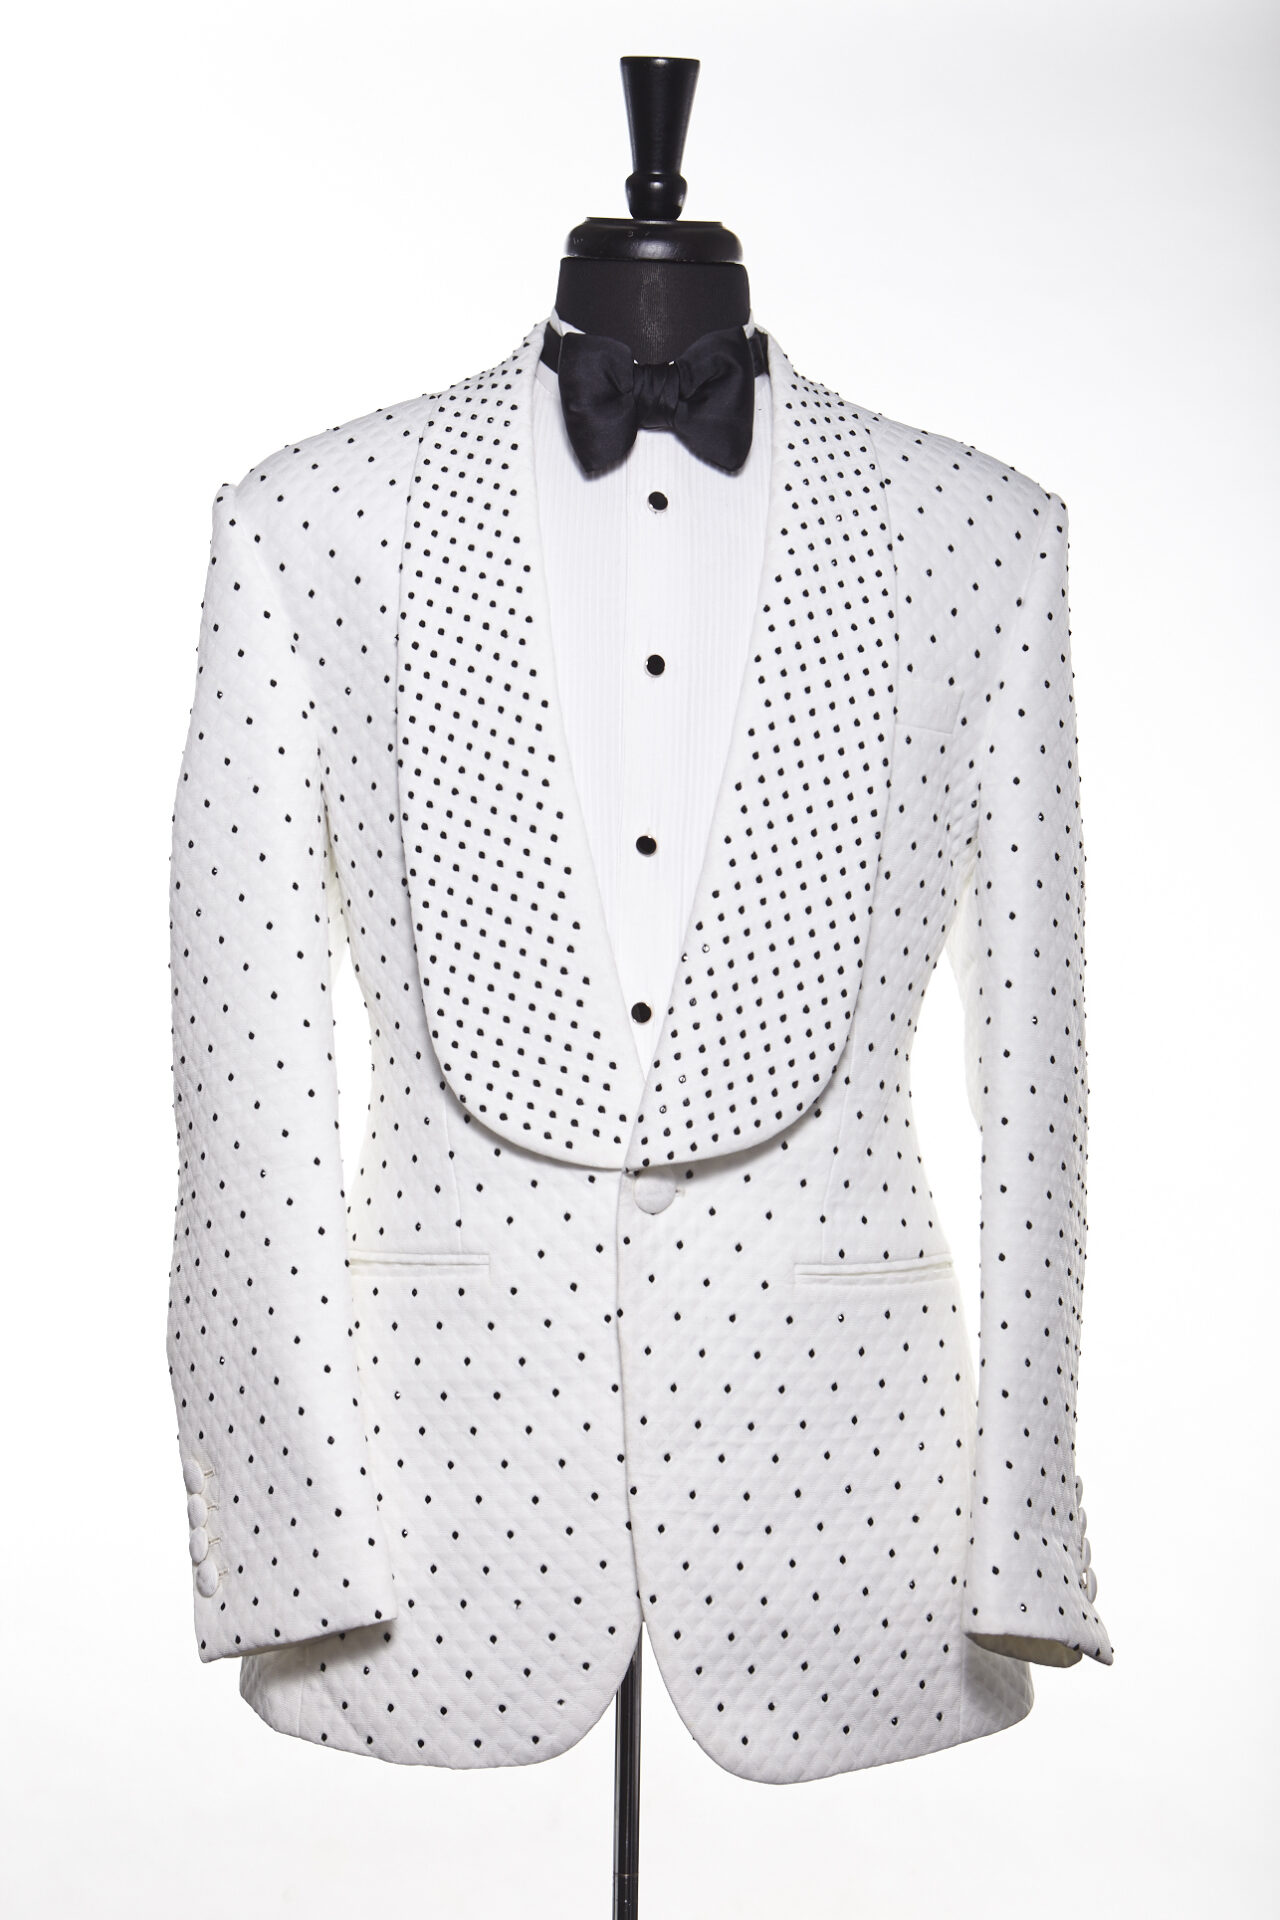 WHITE JACQUARD TUXEDO WITH DOTTED BLACK EMBROIDERED RHINESTONE SUIT -  Stanlion